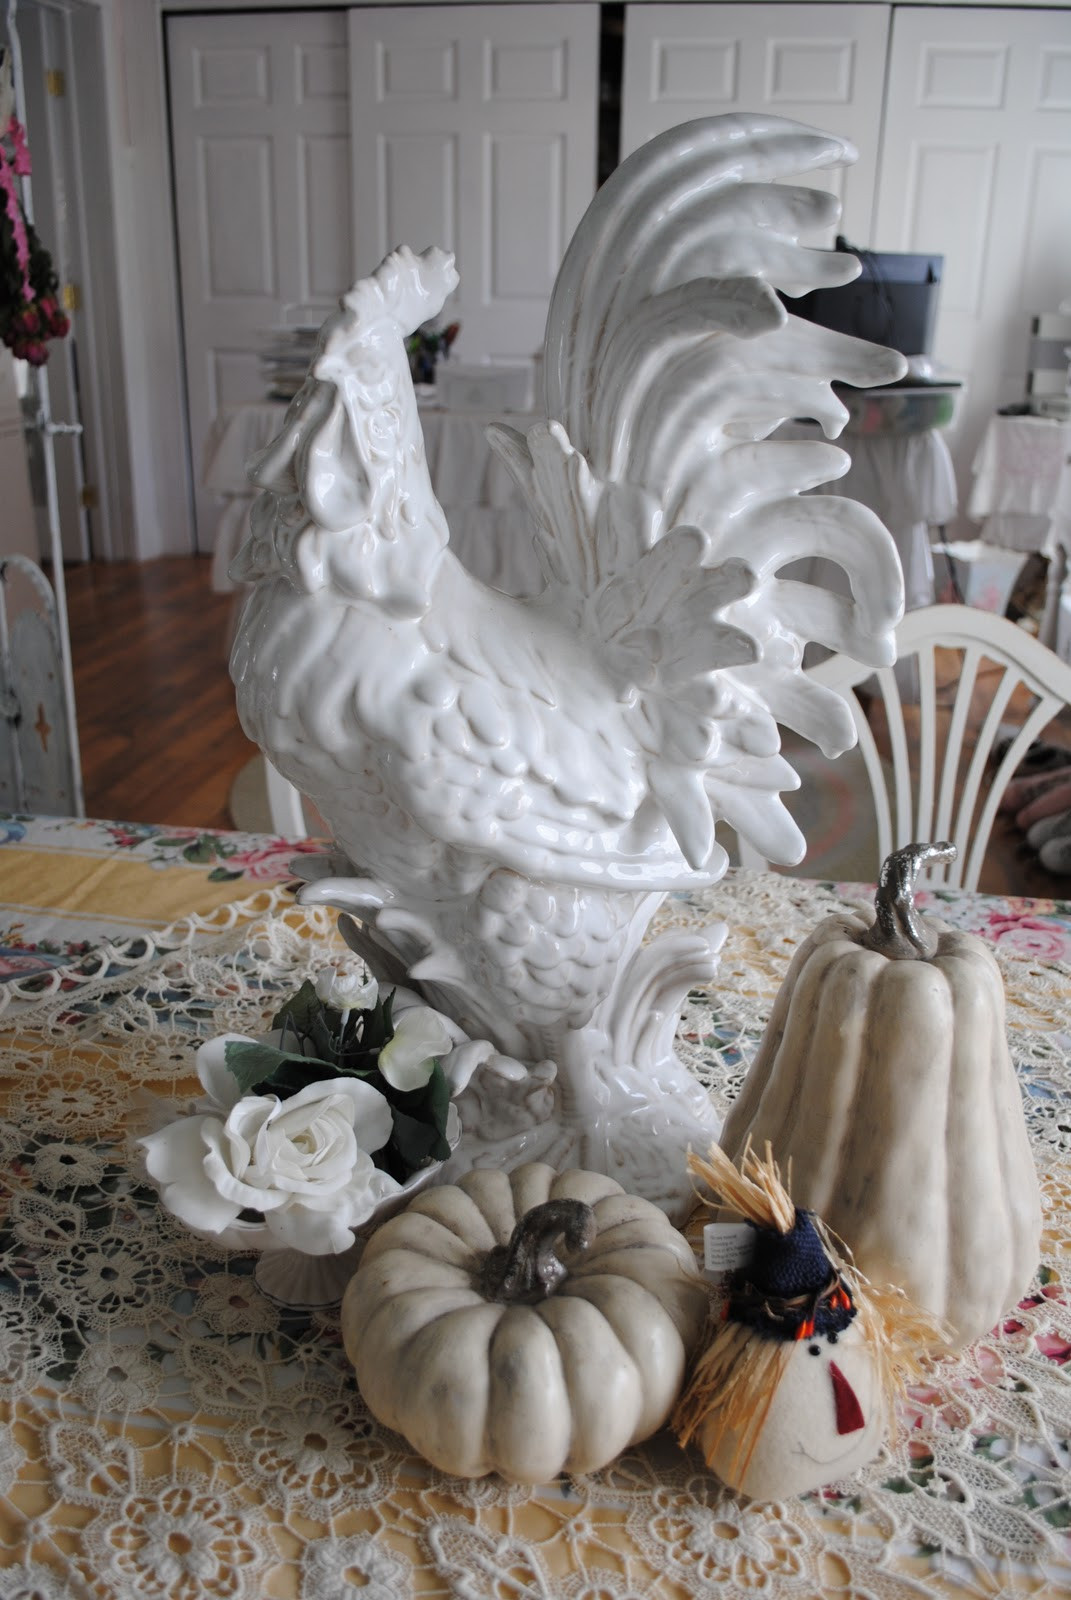 Shabby Chic Fall Decor
 Patty Dorsi Designs Decorating for fall Shabby Chic Style